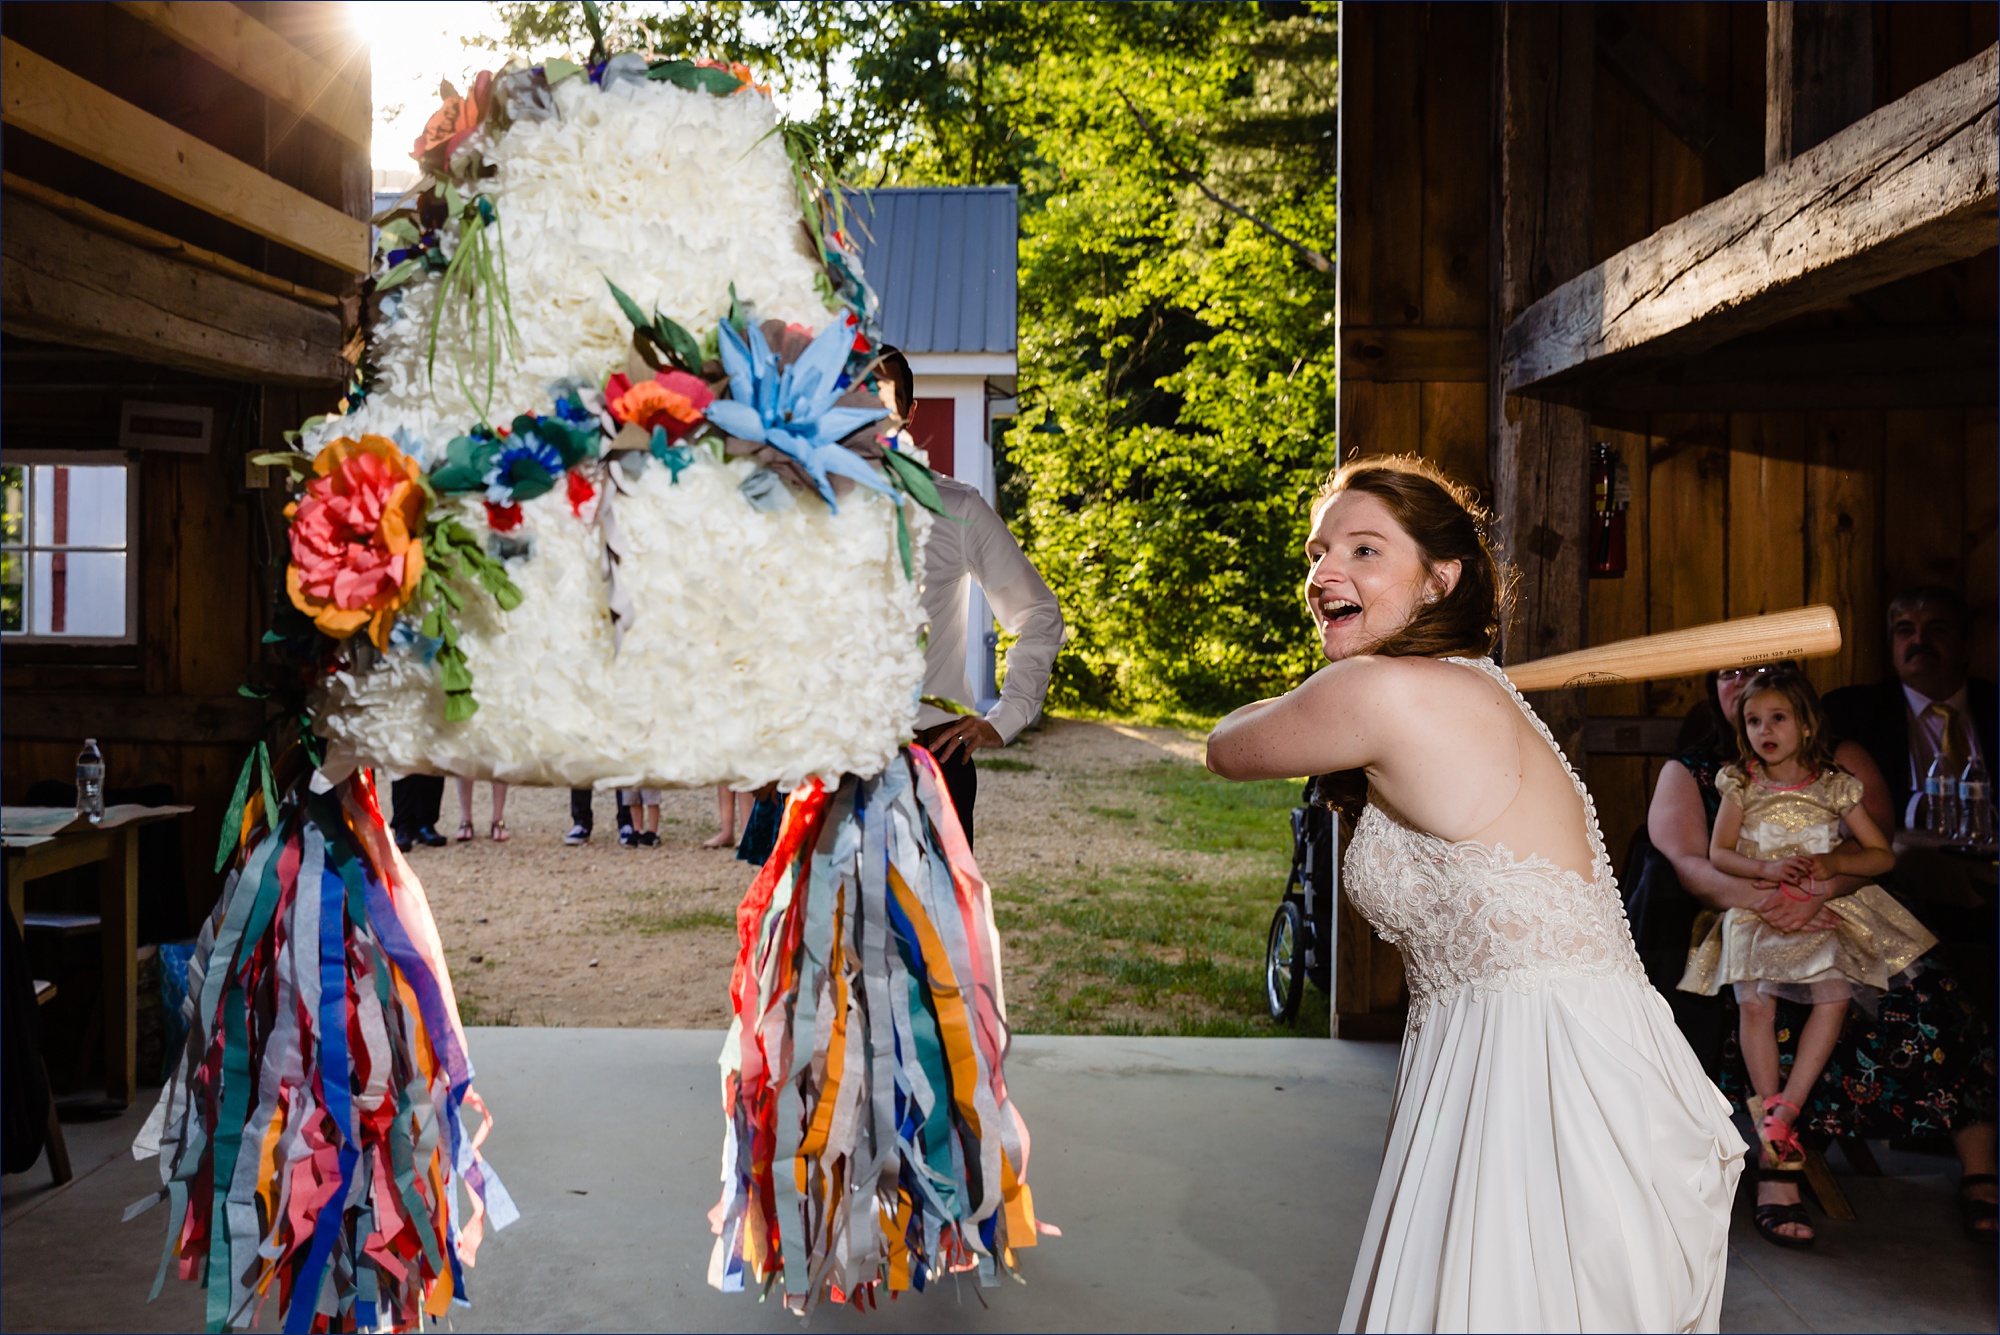 The bride gears up to smash a piñata shaped as a wedding cake 